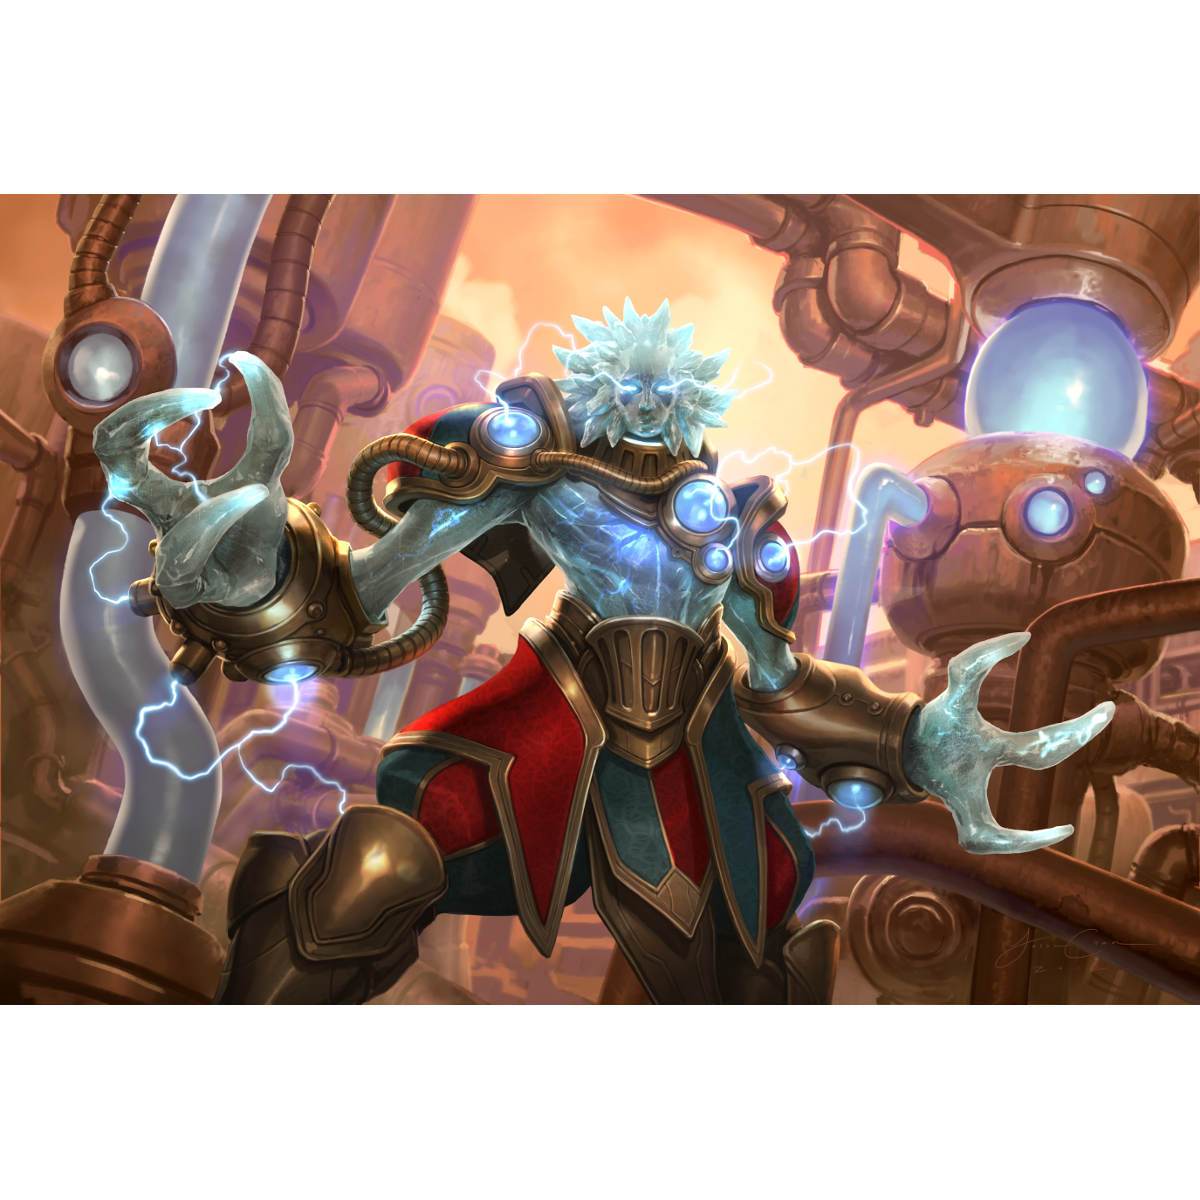 Melek, Izzet Paragon Print - Print - Original Magic Art - Accessories for Magic the Gathering and other card games